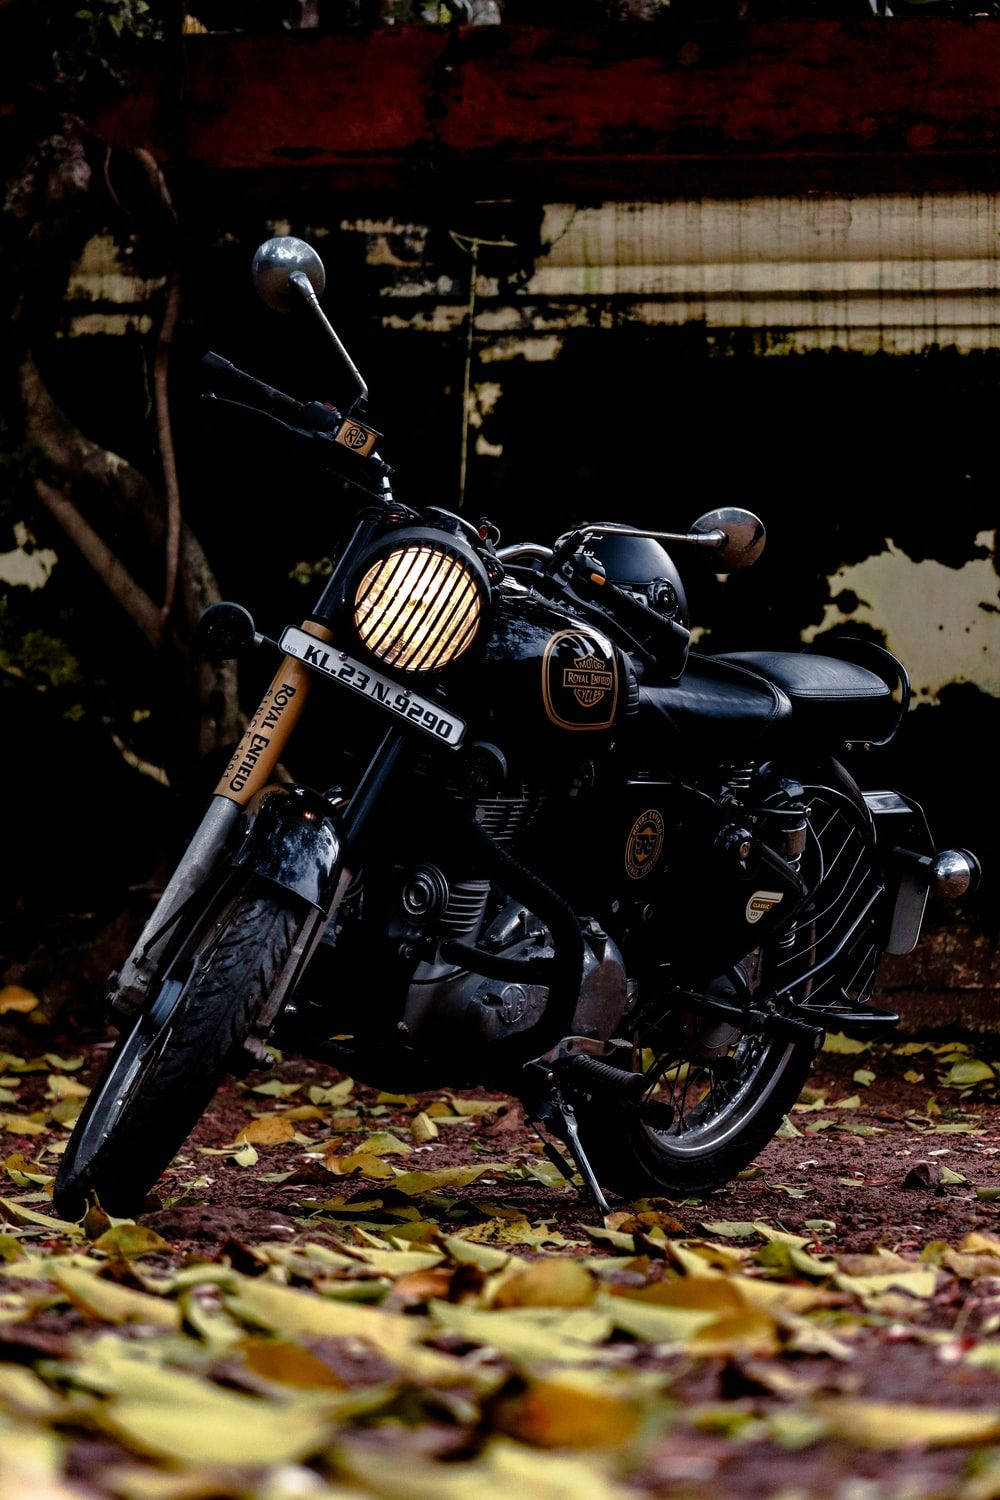 The Royal Enfield Classic 350 Kgf Bike In All Its Glory Wallpaper